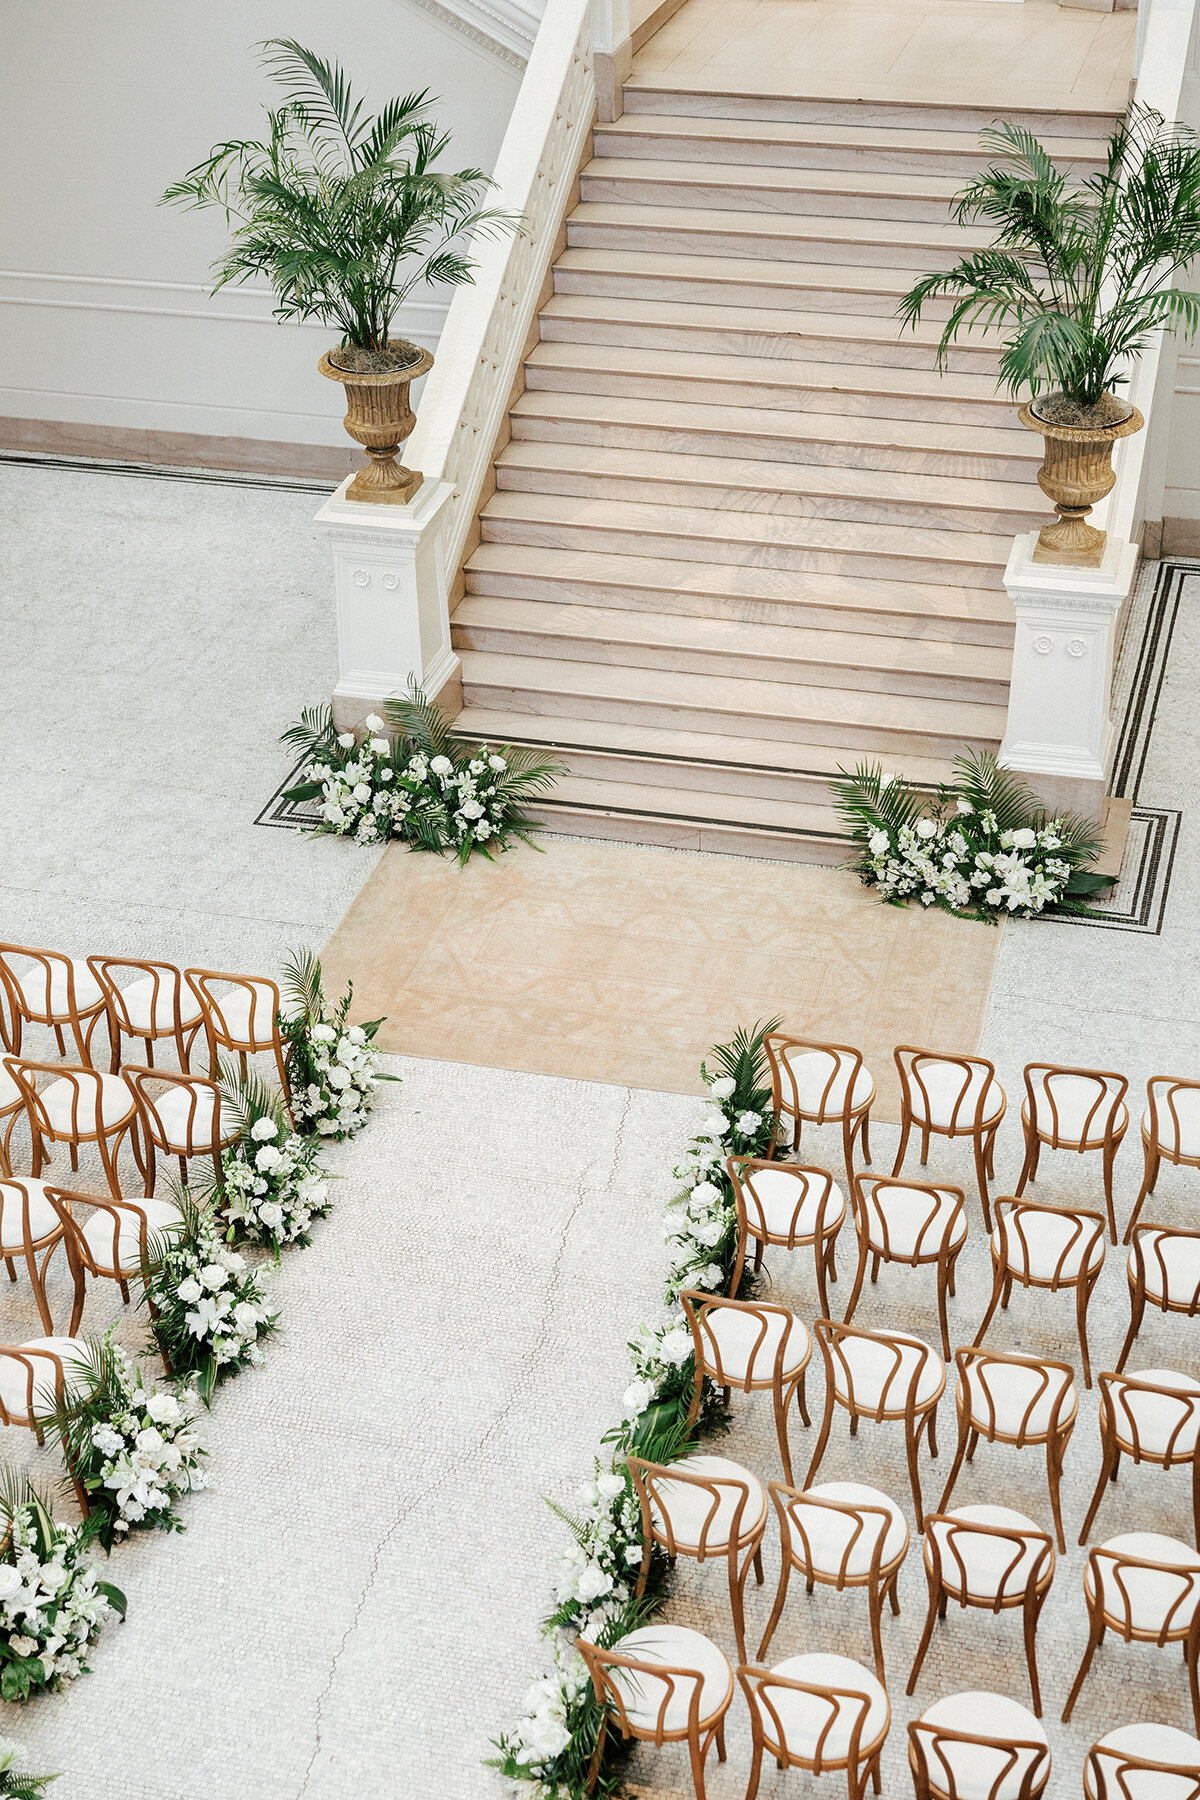 Sumner + Scott - New Orleans Museum of Art Wedding - Luxury Event Planning by Michelle Norwood - 8